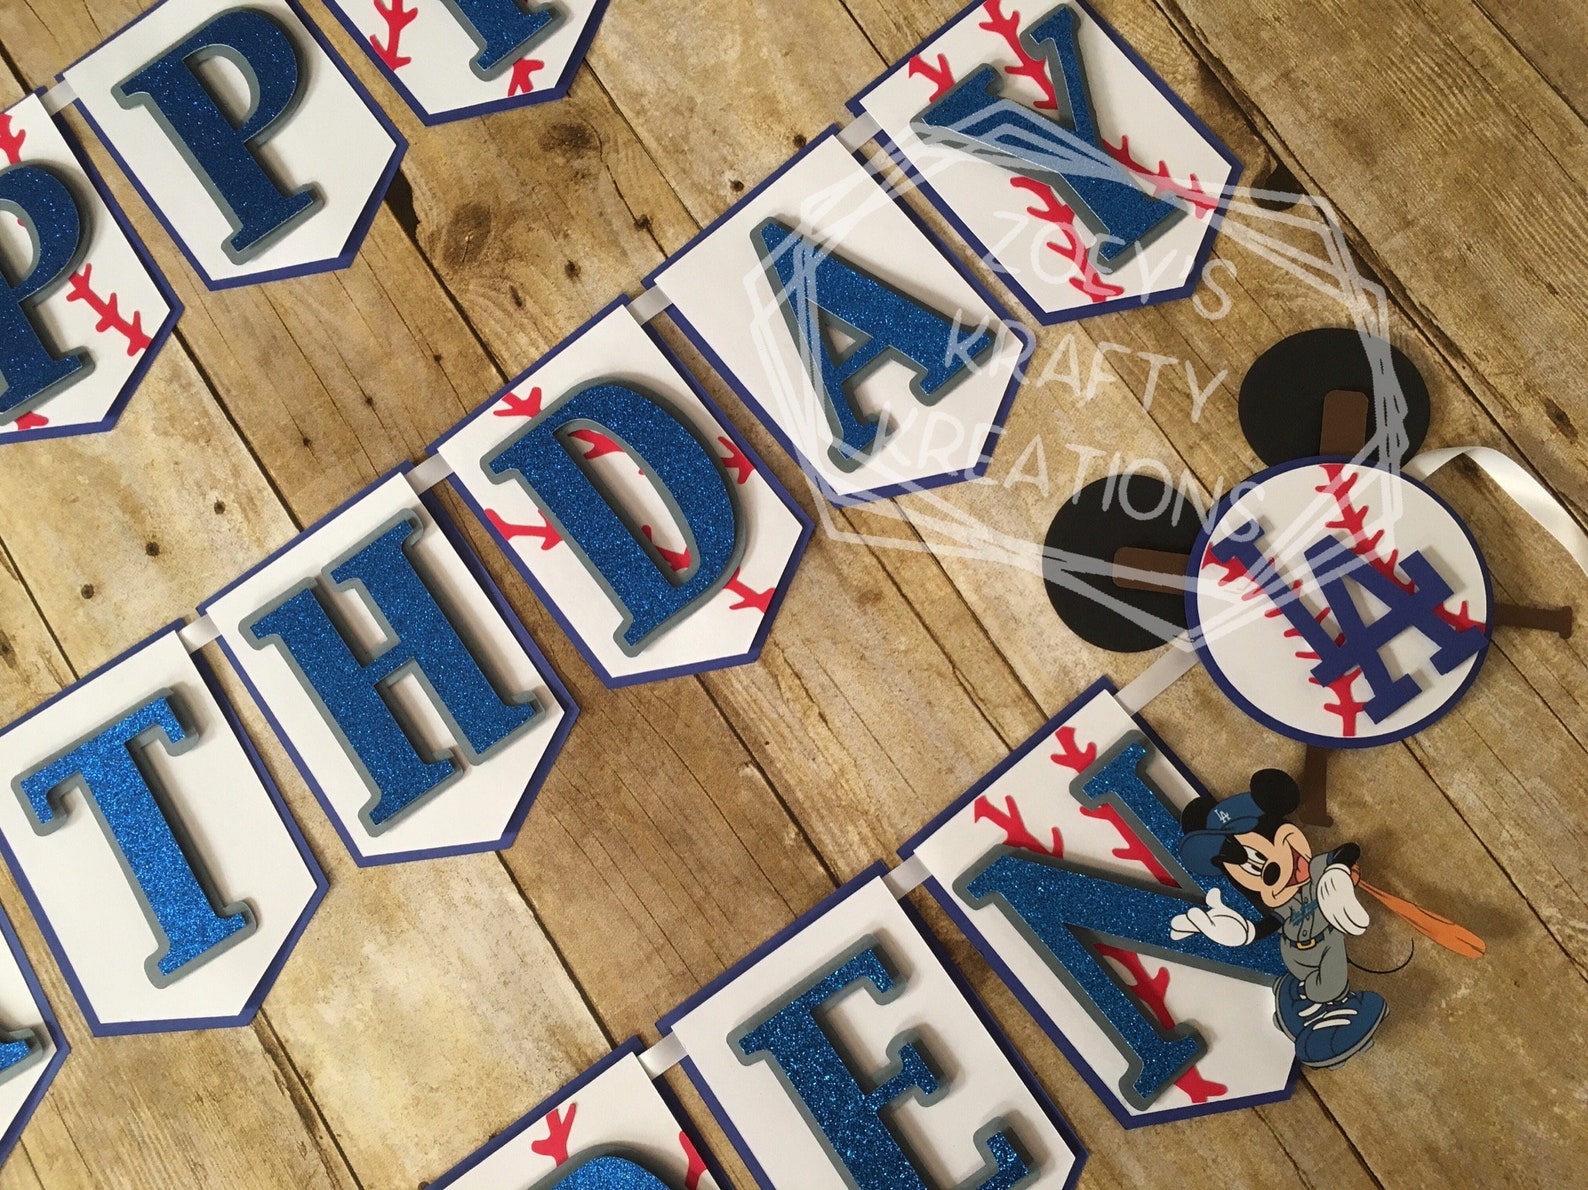 dodgers-mickey-inspired-banner-birthday-banner-dodgers-etsy